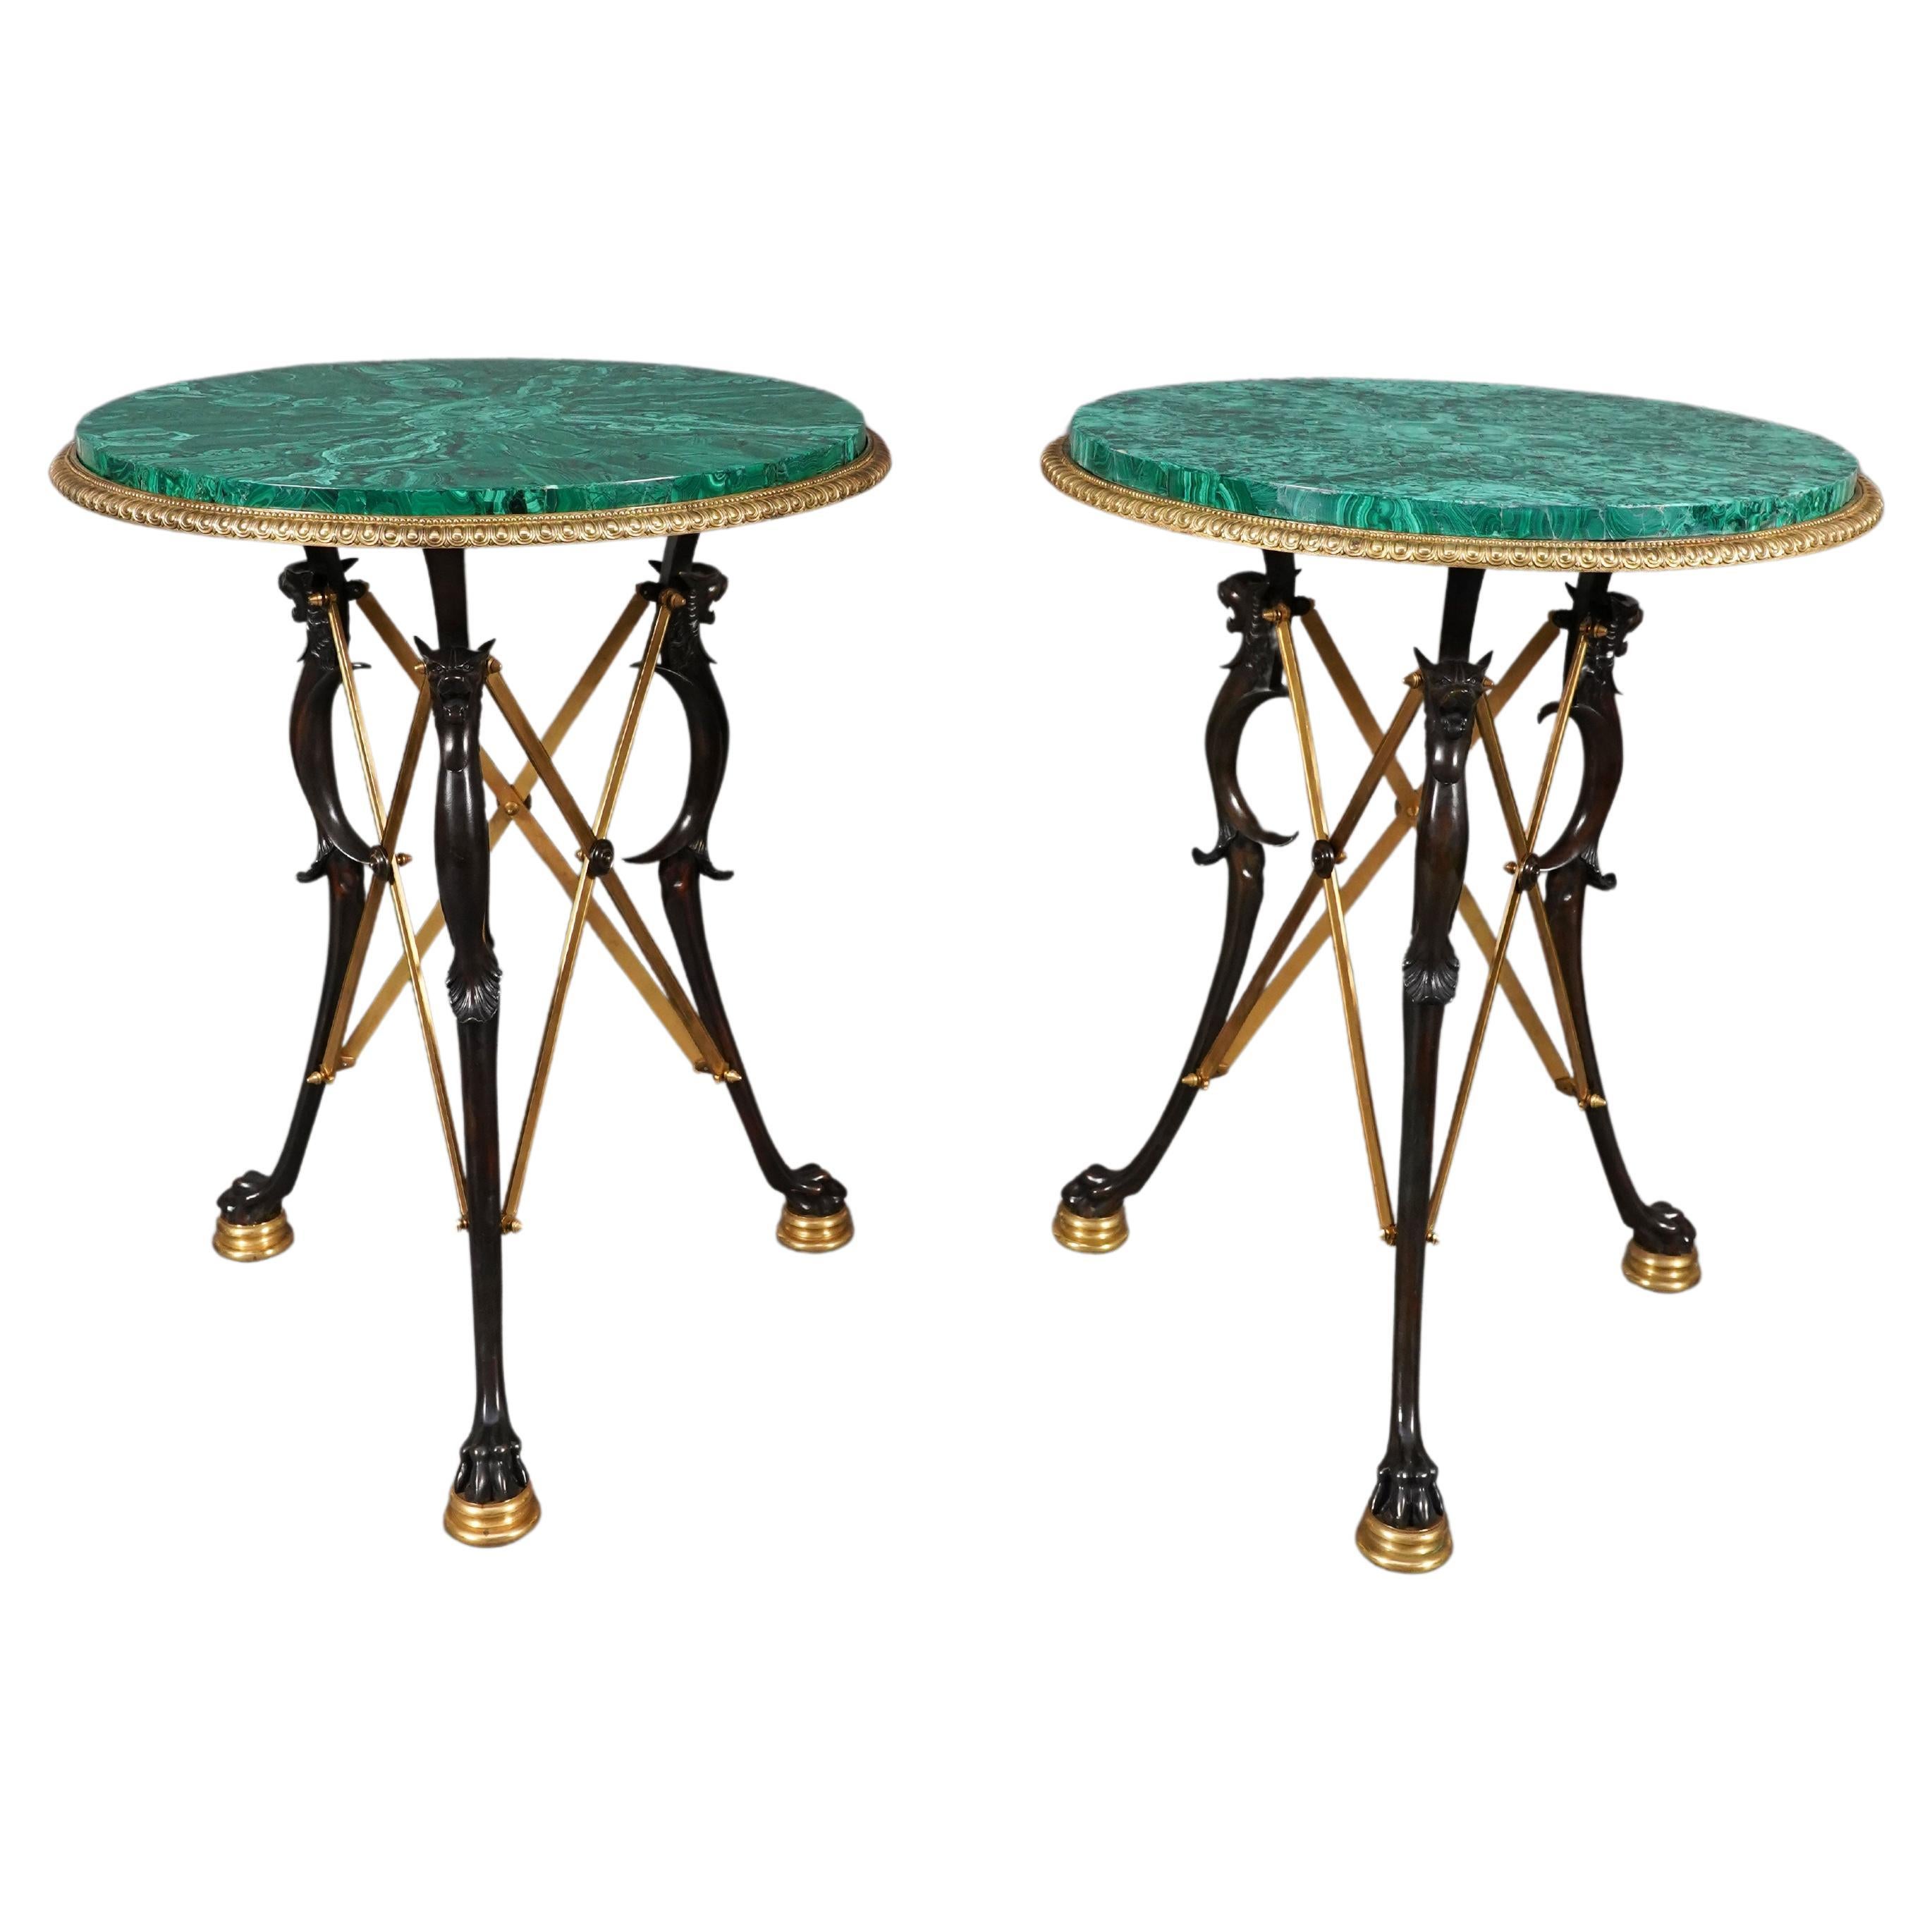 Pair of Neo-Pompeian Gueridons Malachite top , by H. Picard, France, c. 1865